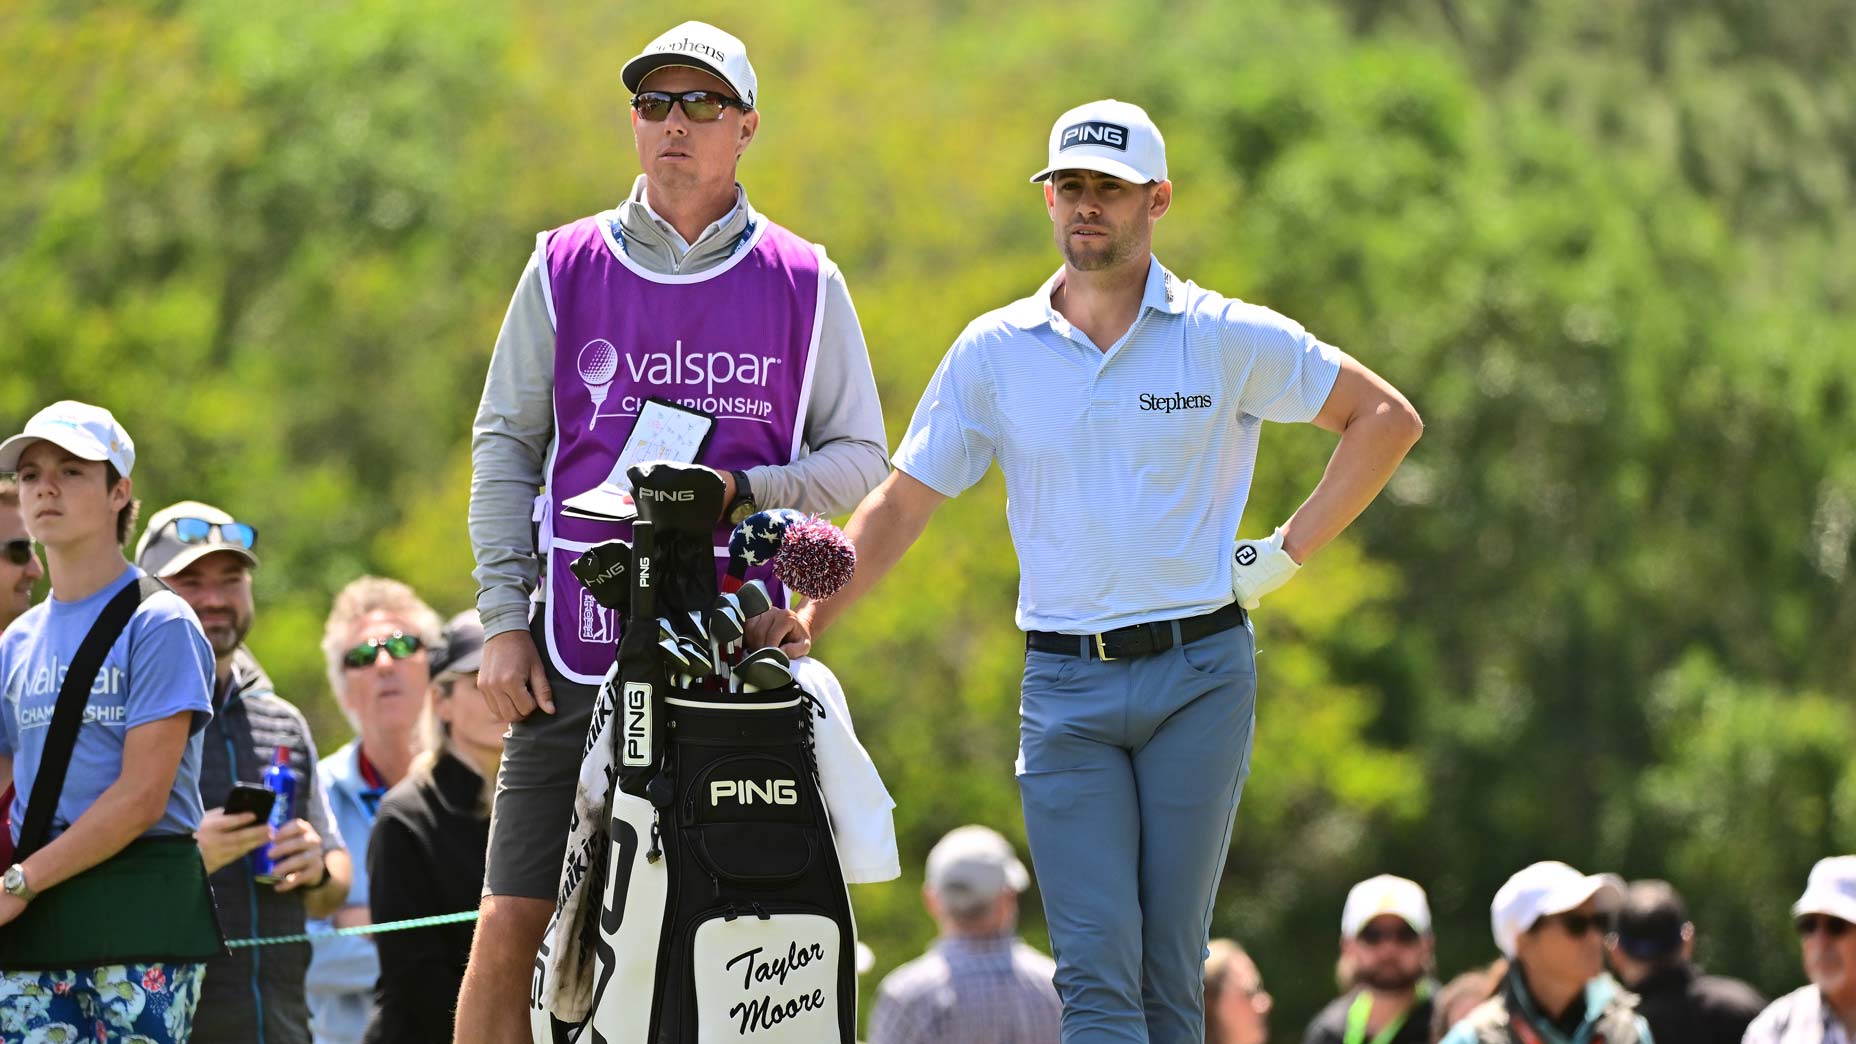 PGA Tour pro Taylor Moore stands with caddie on tee at 2023 Valspar Championship